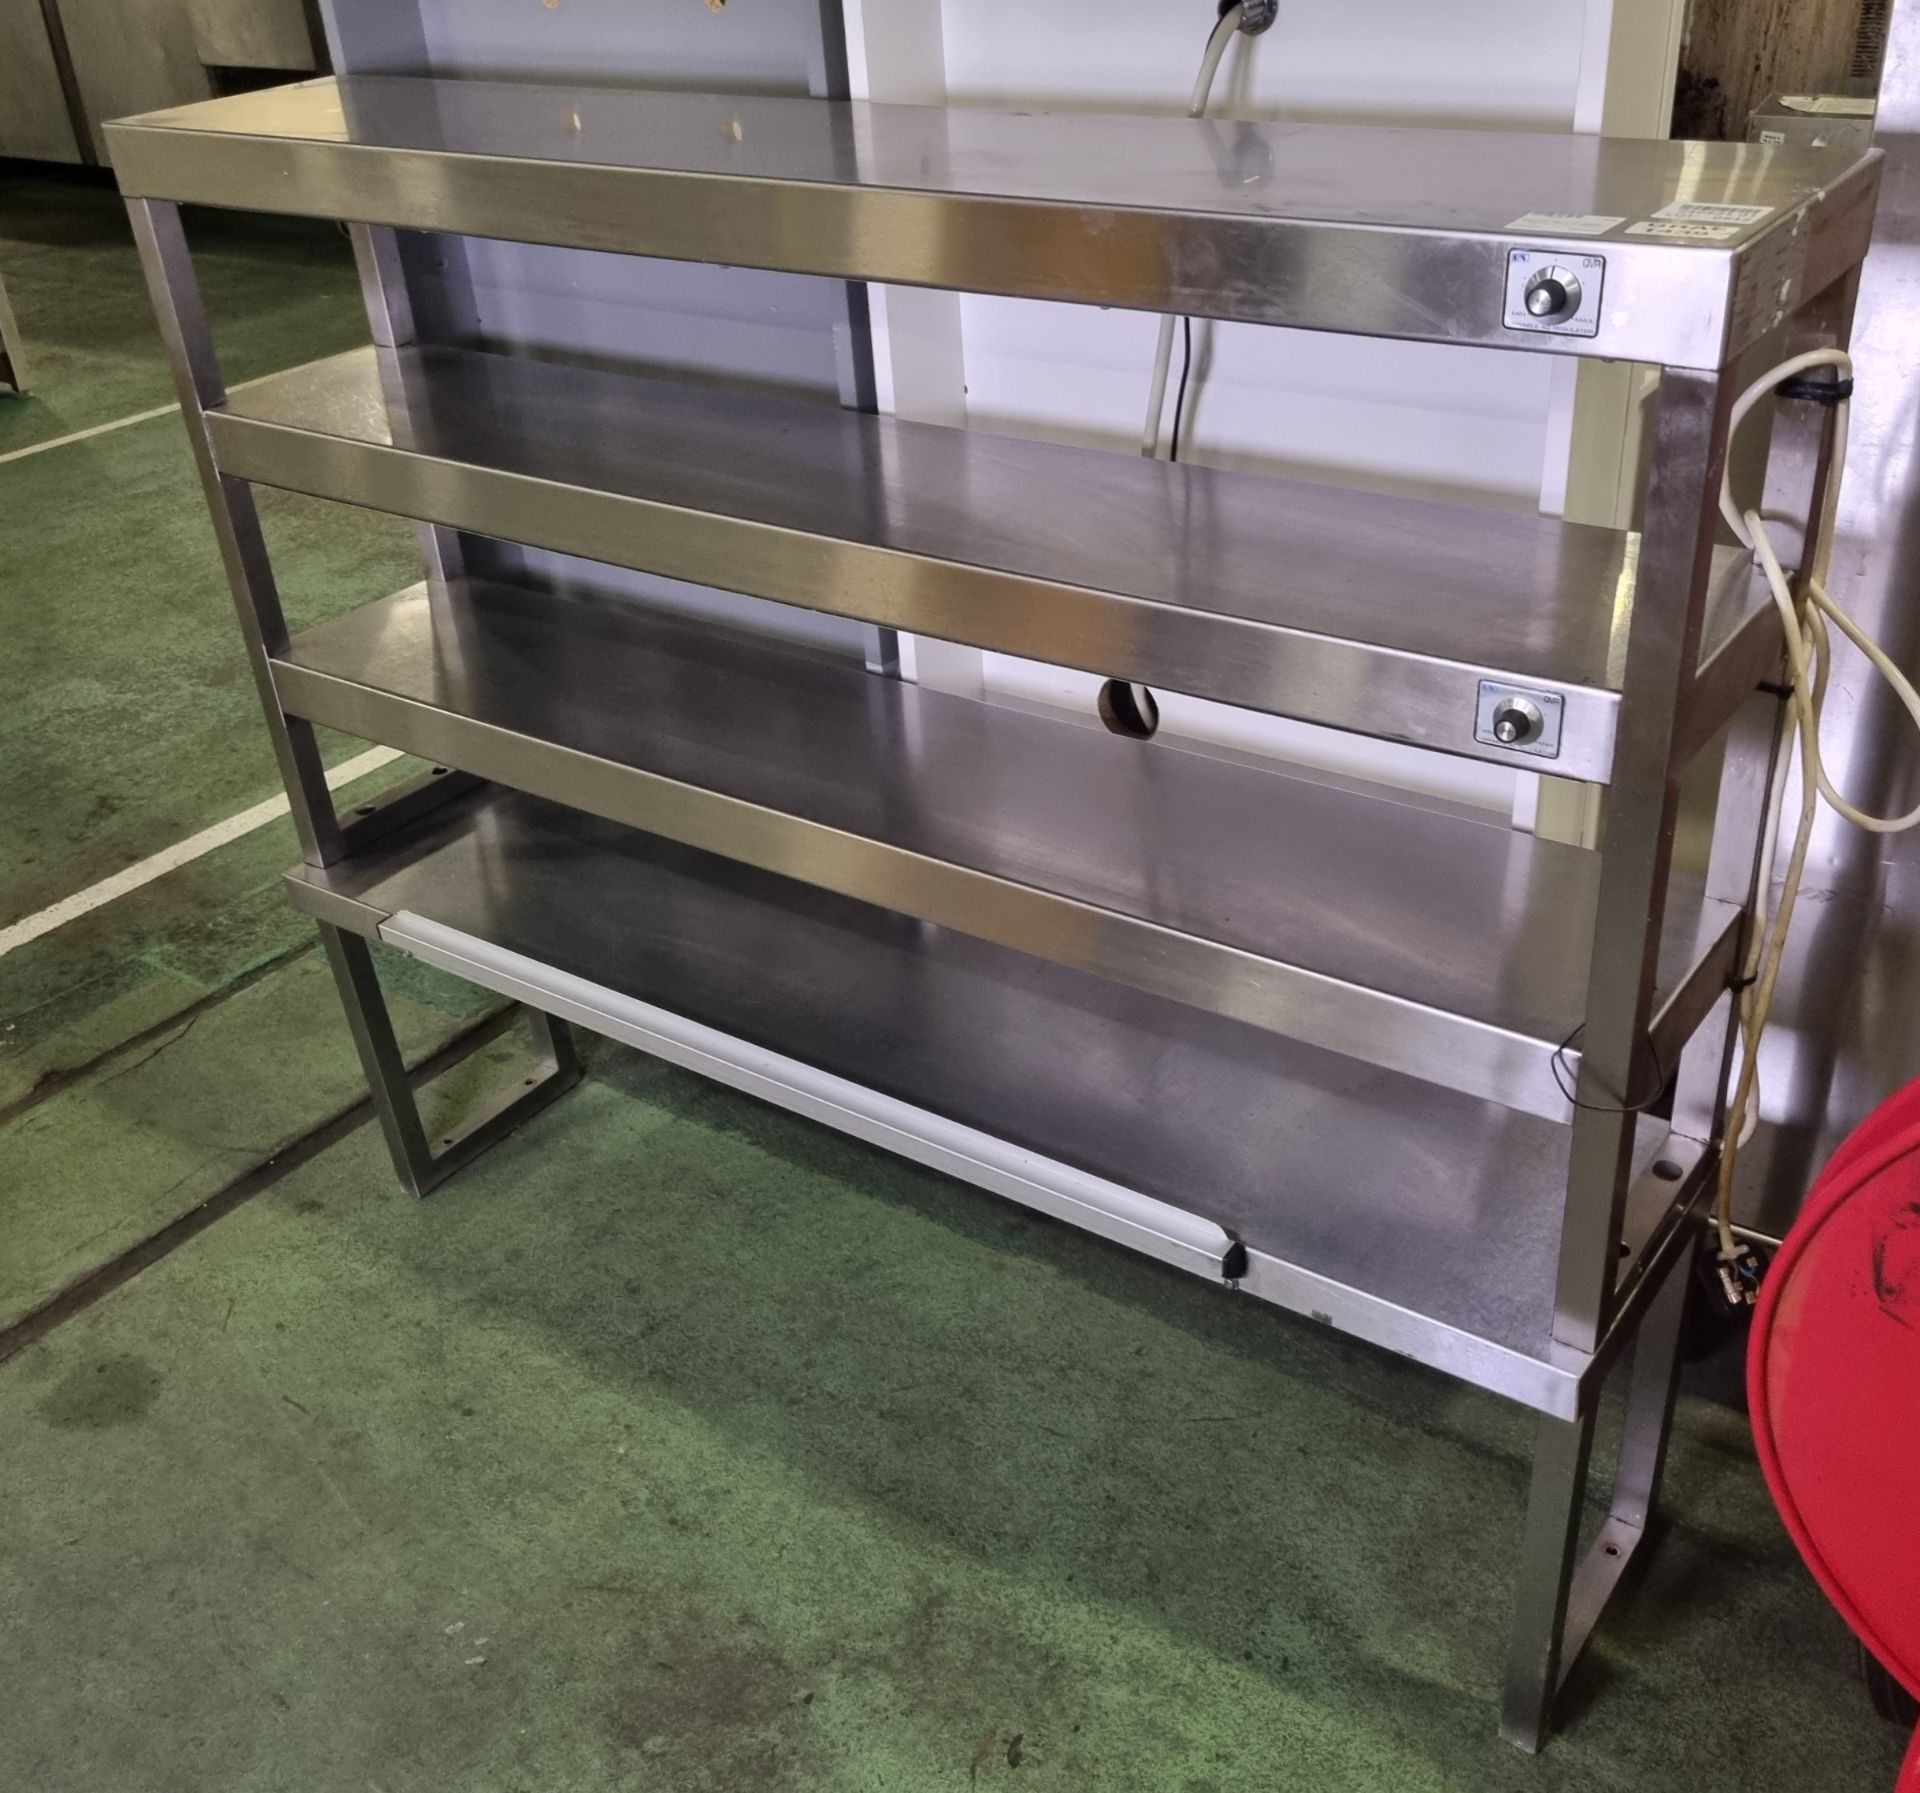 Stainless steel 4 tier gantry - L 1350 x W 300 x H 1120mm - Image 3 of 4